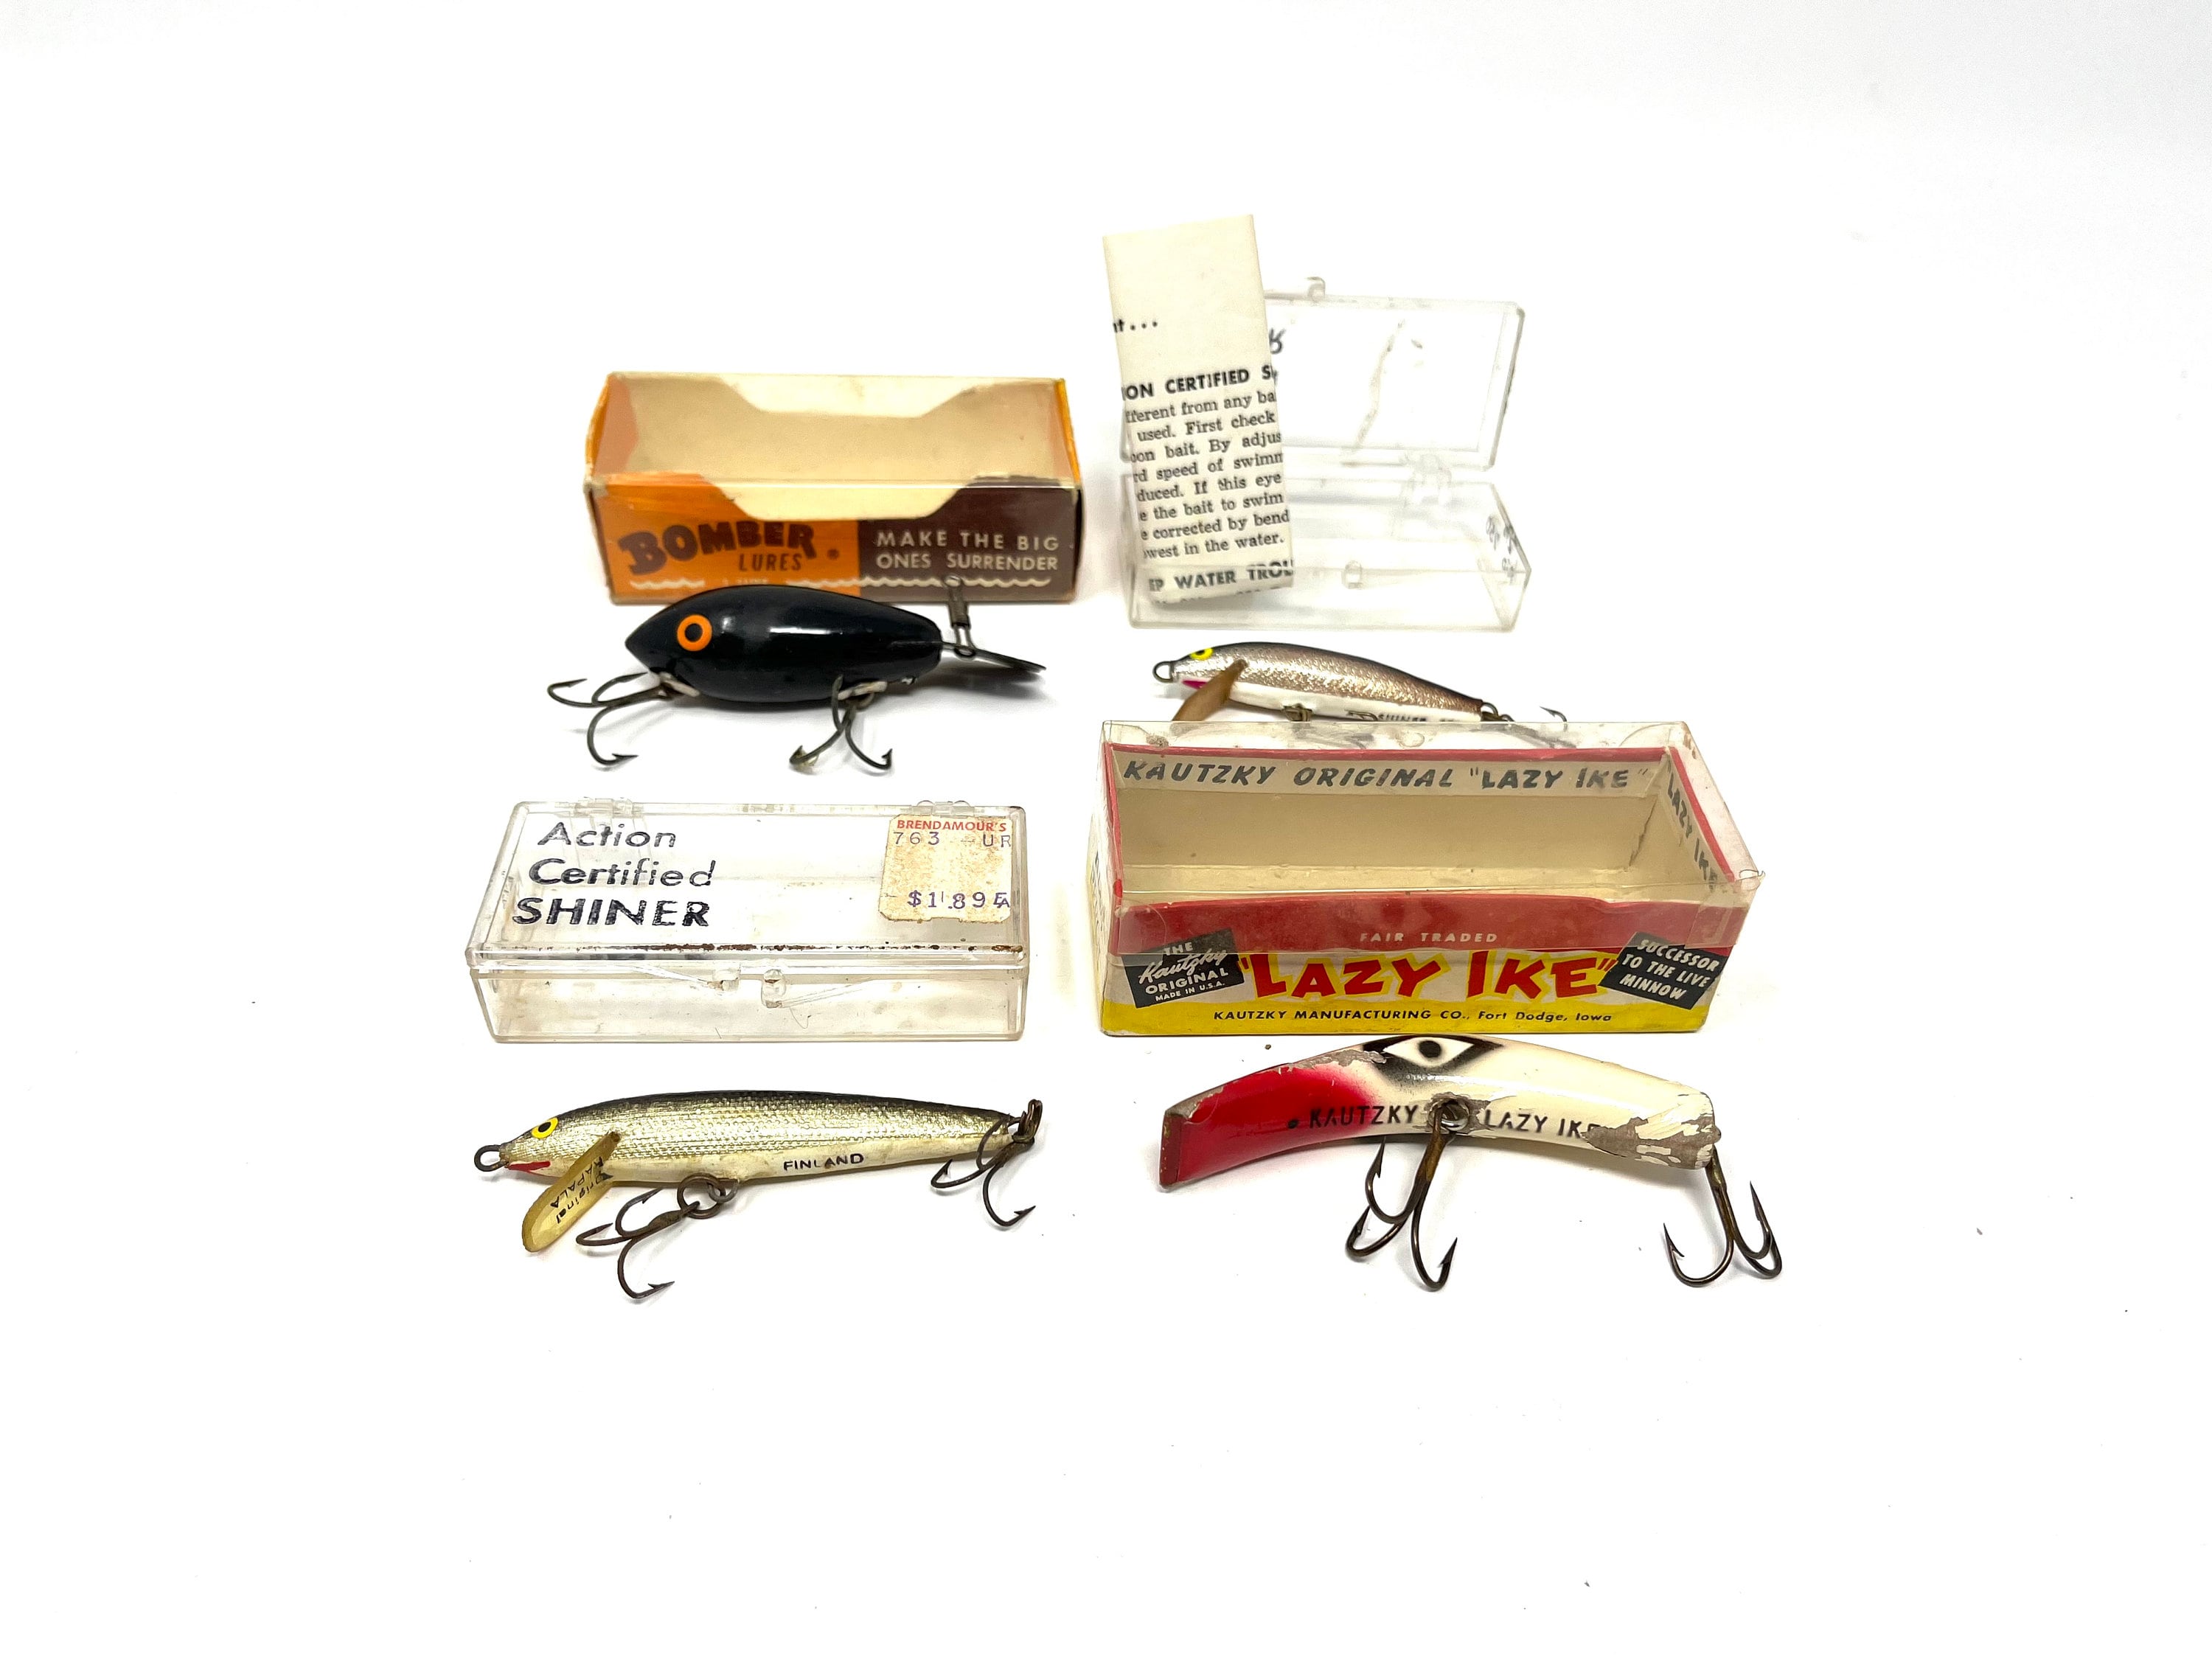 4 Vintage Boxed Lures / Antique Fishing Lure with Box / Vintage Lazy Ike  Lure / Antique Bomber Lure / 2 Certified Shiner Lure